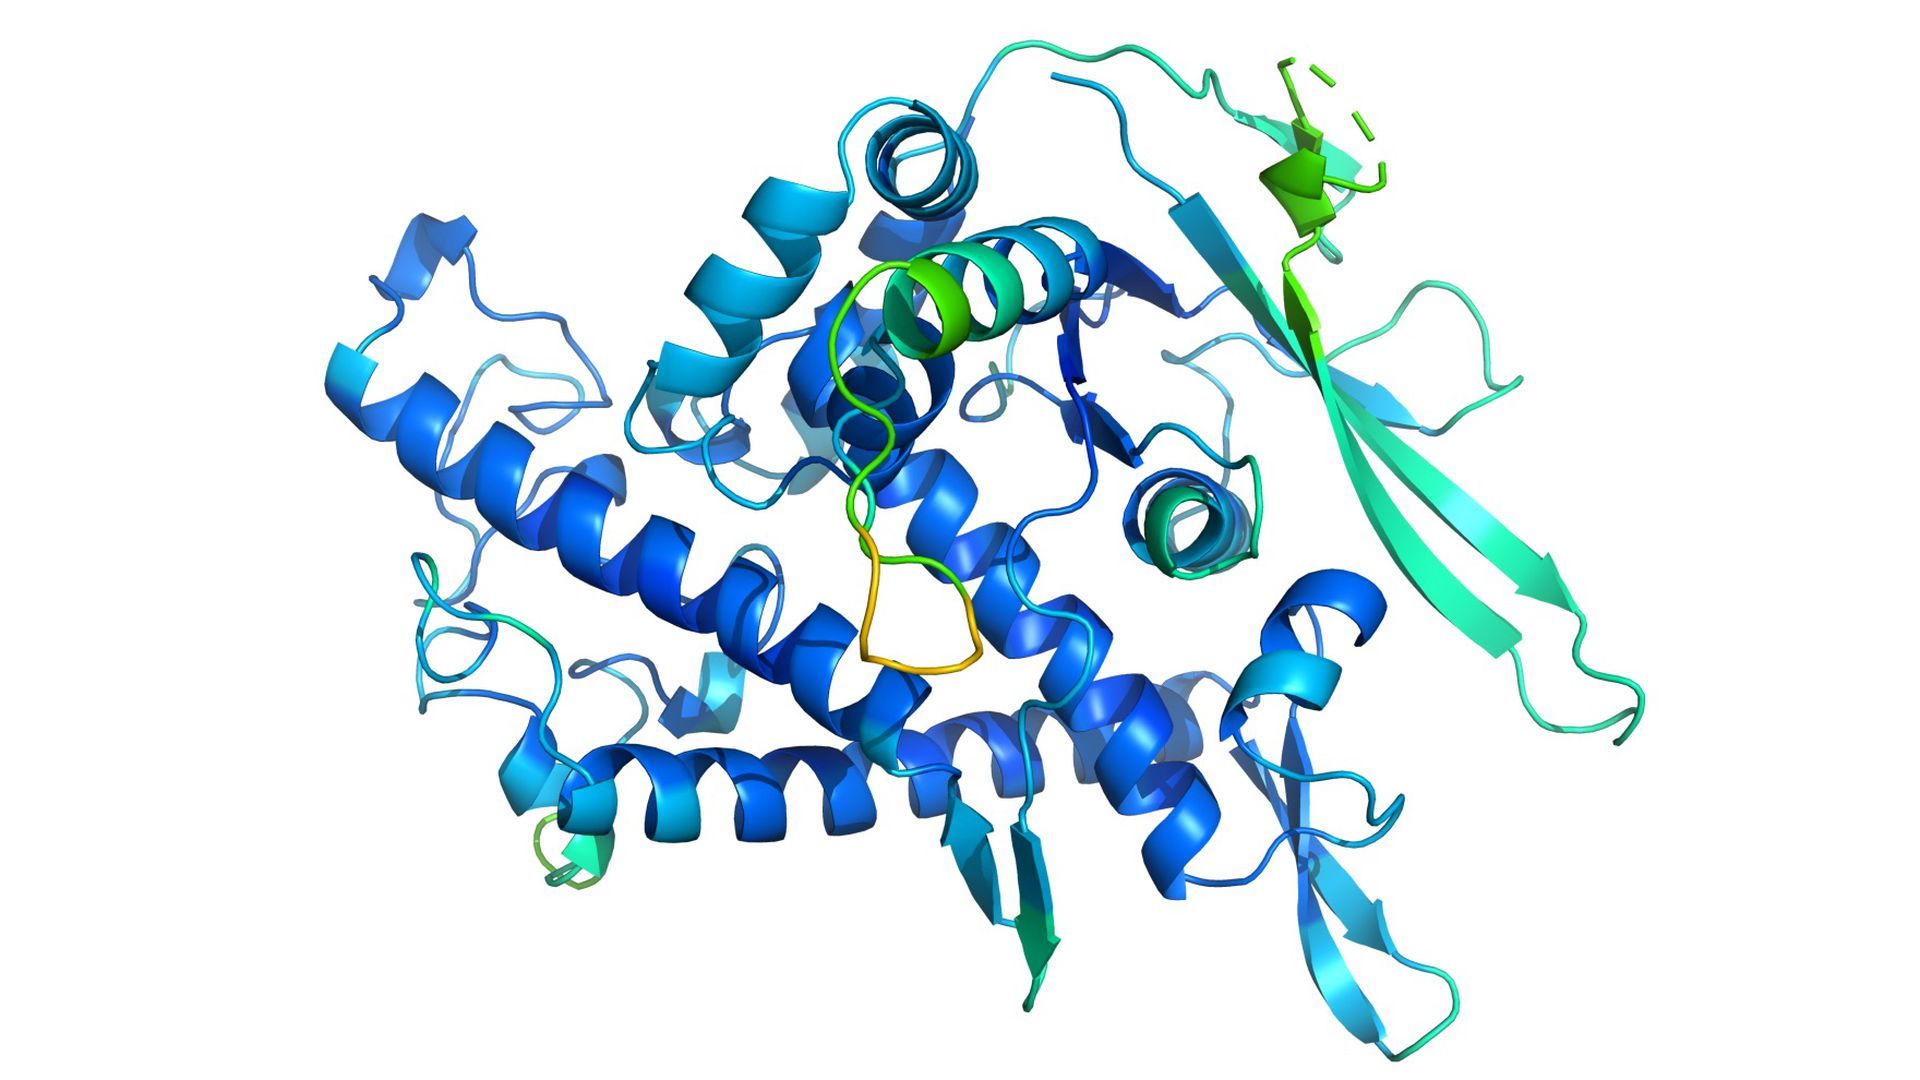 The structure of T1037, part of a protein from a phage that infects viruses.